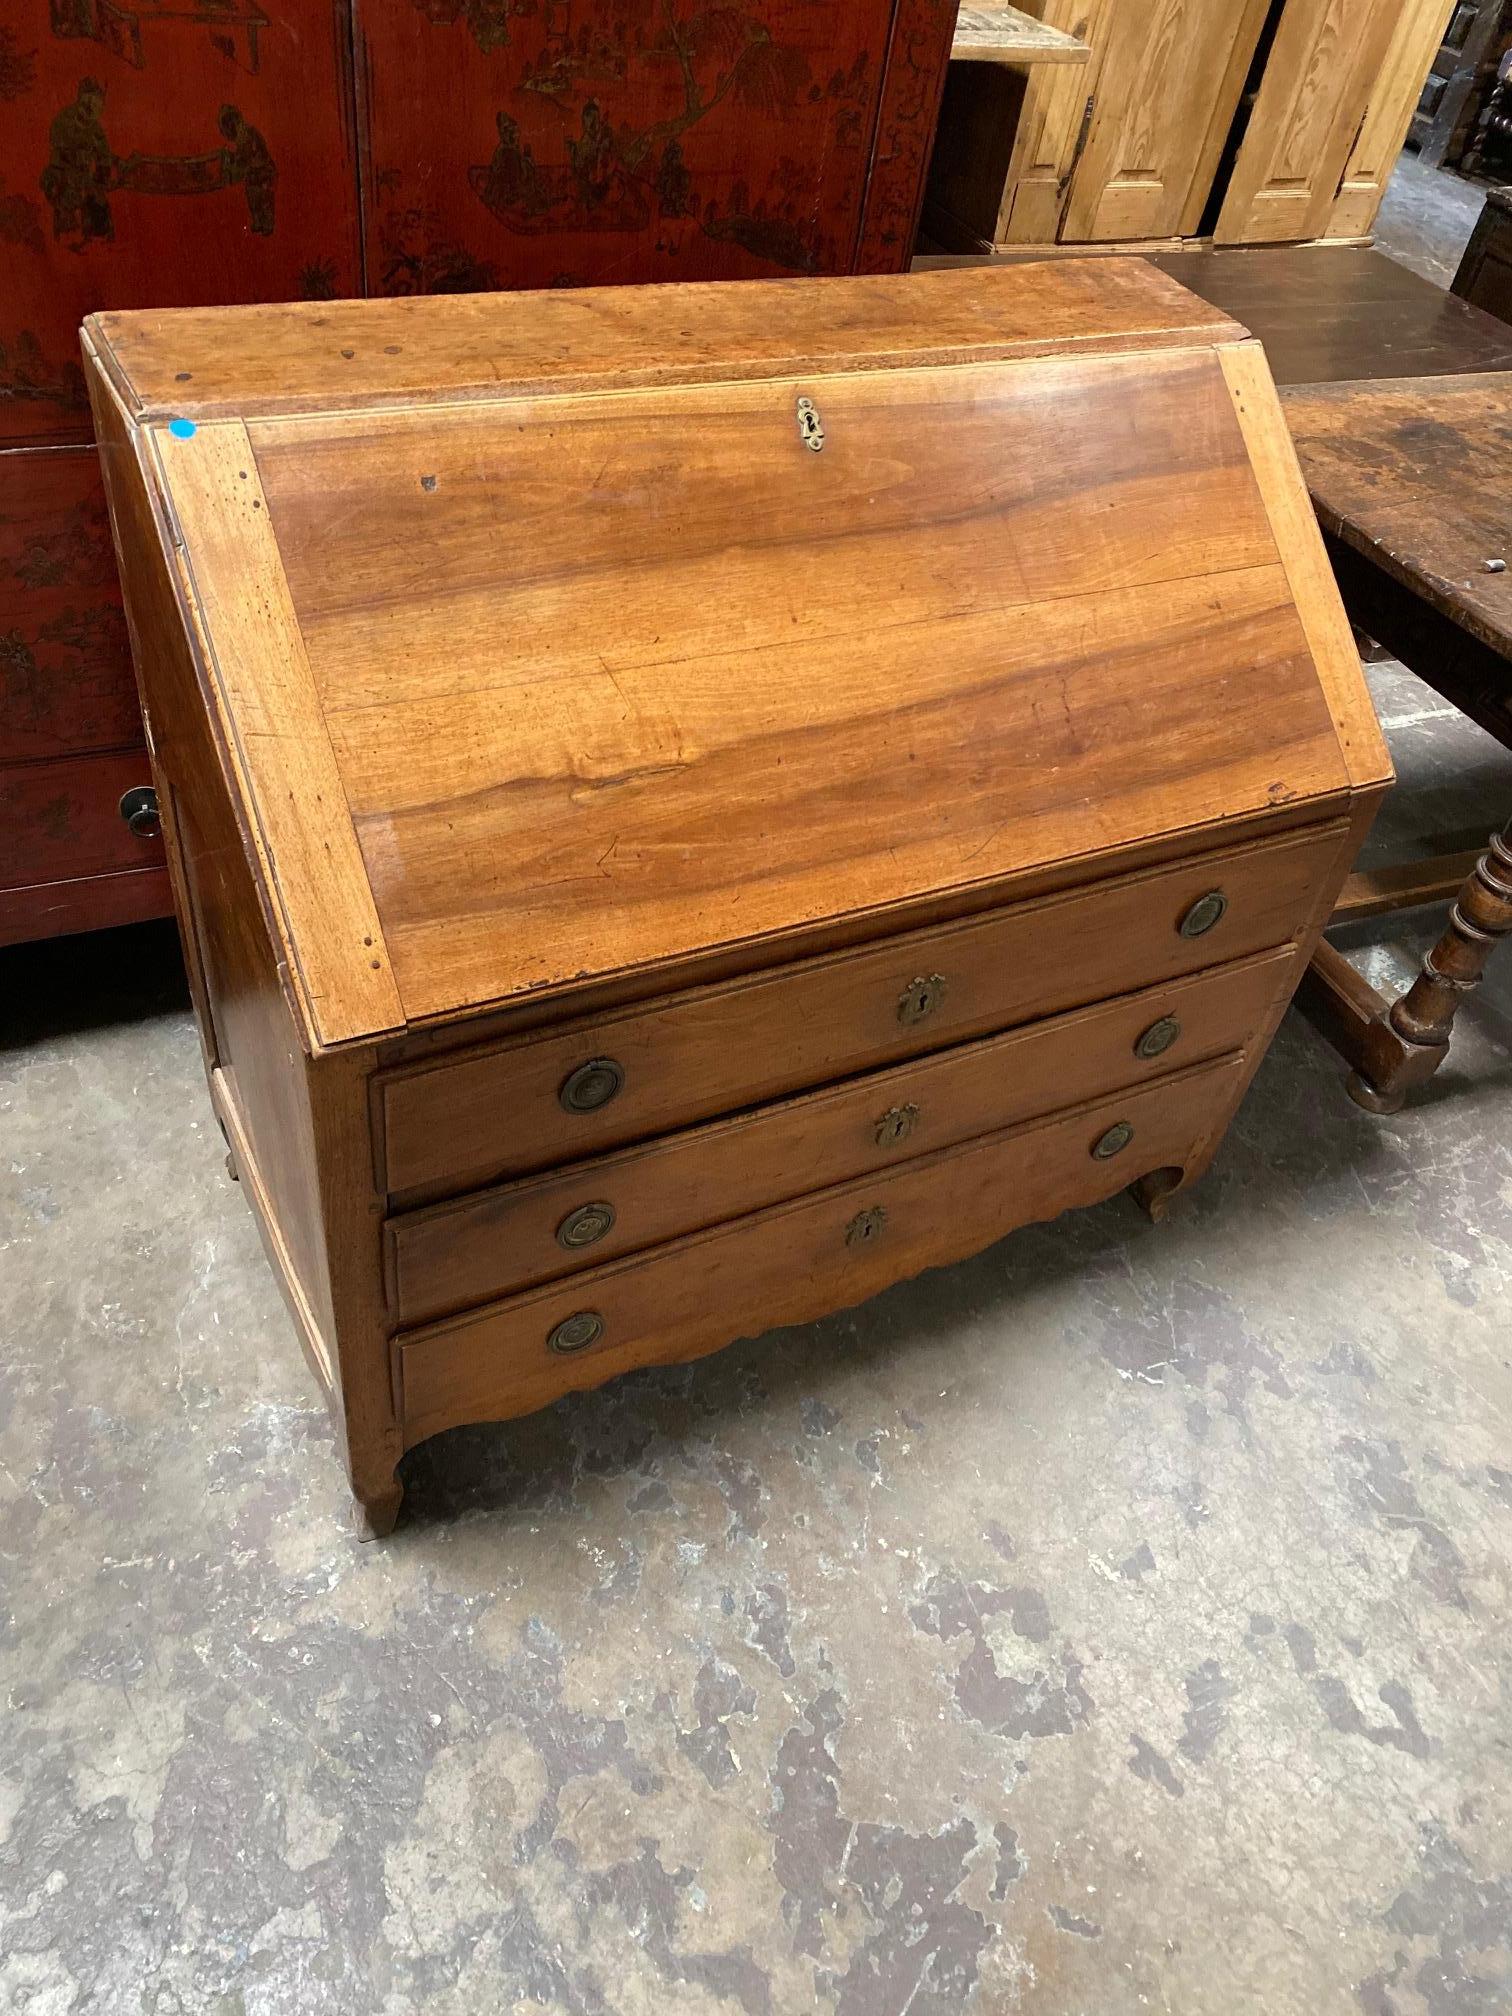 This French desk is made of walnut and dates back to 1800. 

Measurements: 44” W x 41” H x 23” D (desk tucked in) 42” D (desk pulled out).
  
        